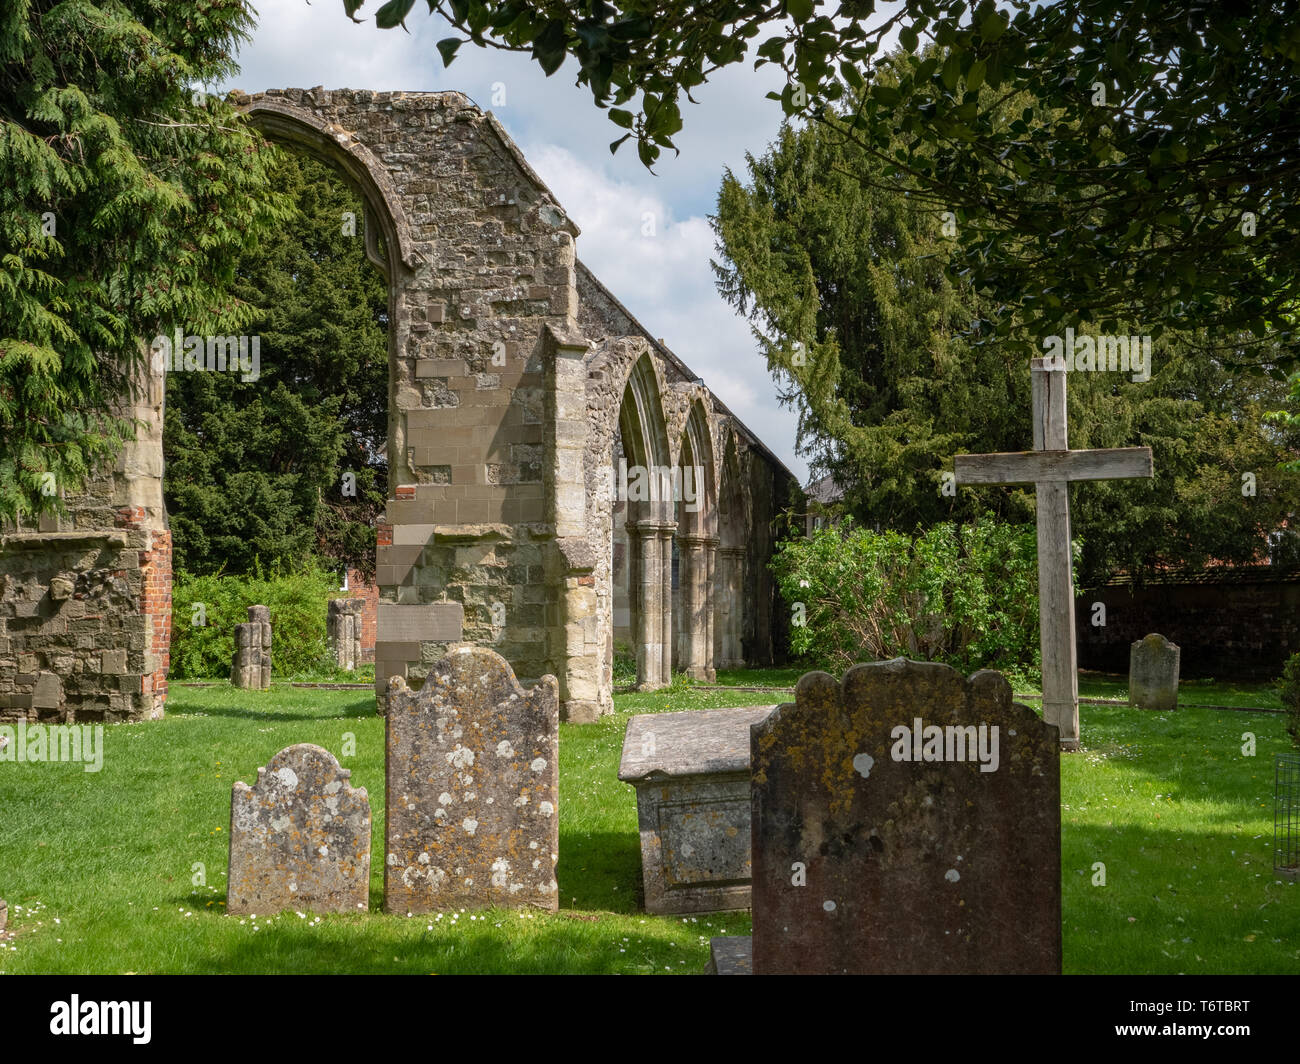 Ruins of St Mary's Old Church, Market Place, Wilton, nr Salisbury, Wiltshire, UK. Stock Photo